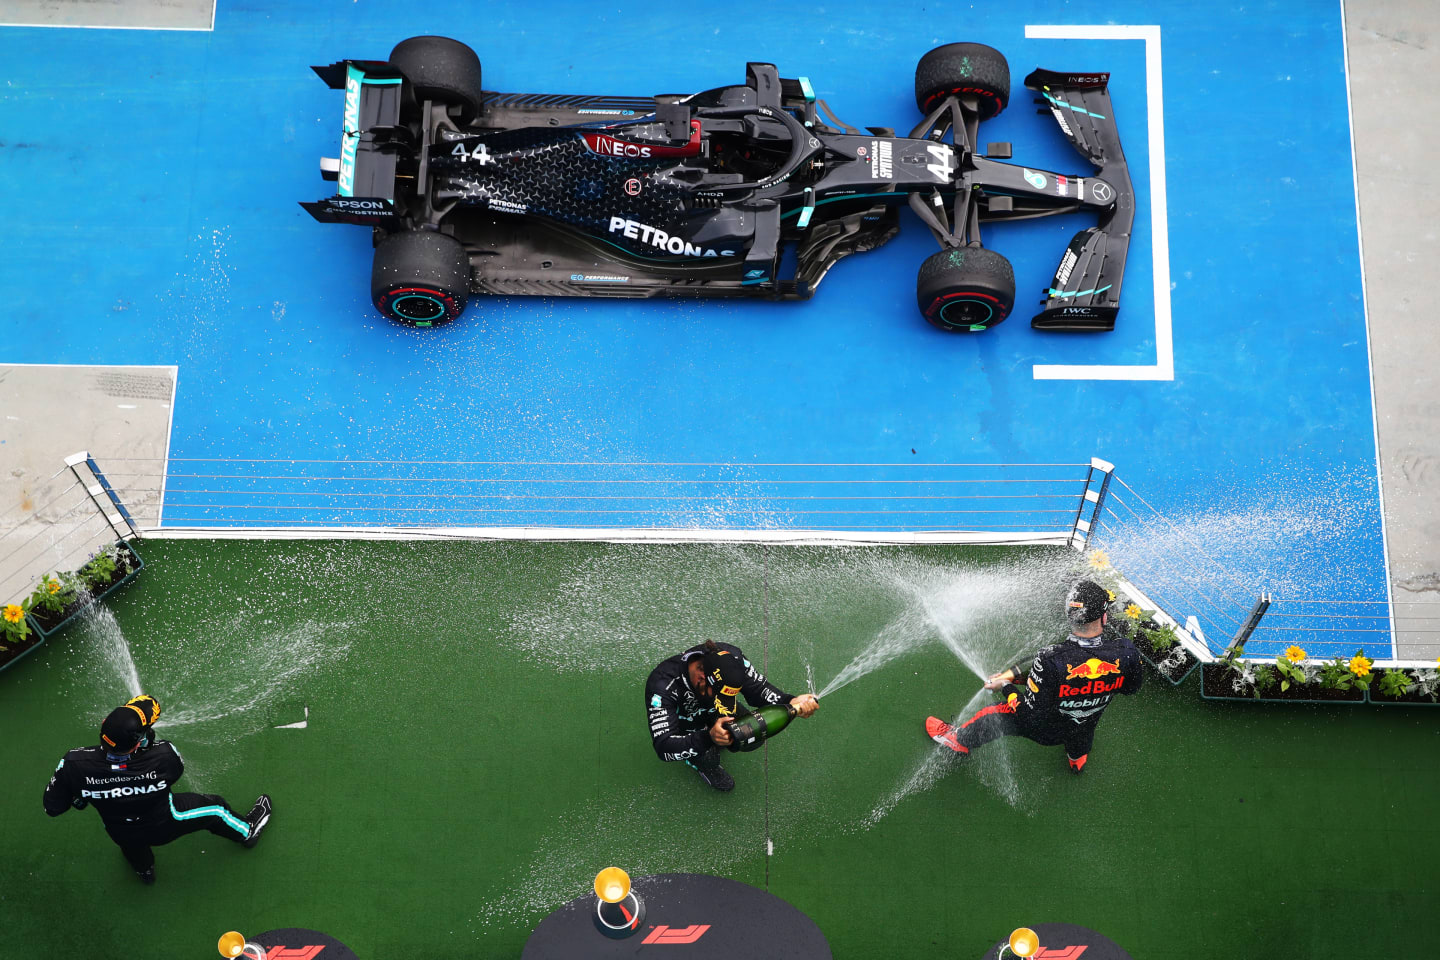 BUDAPEST, HUNGARY - JULY 19: Race winner Lewis Hamilton of Great Britain and Mercedes GP, second placed Max Verstappen of Netherlands and Red Bull Racing and third placed Valtteri Bottas of Finland and Mercedes GP celebrate on the podium after the Formula One Grand Prix of Hungary at Hungaroring on July 19, 2020 in Budapest, Hungary. (Photo by Mark Thompson/Getty Images)